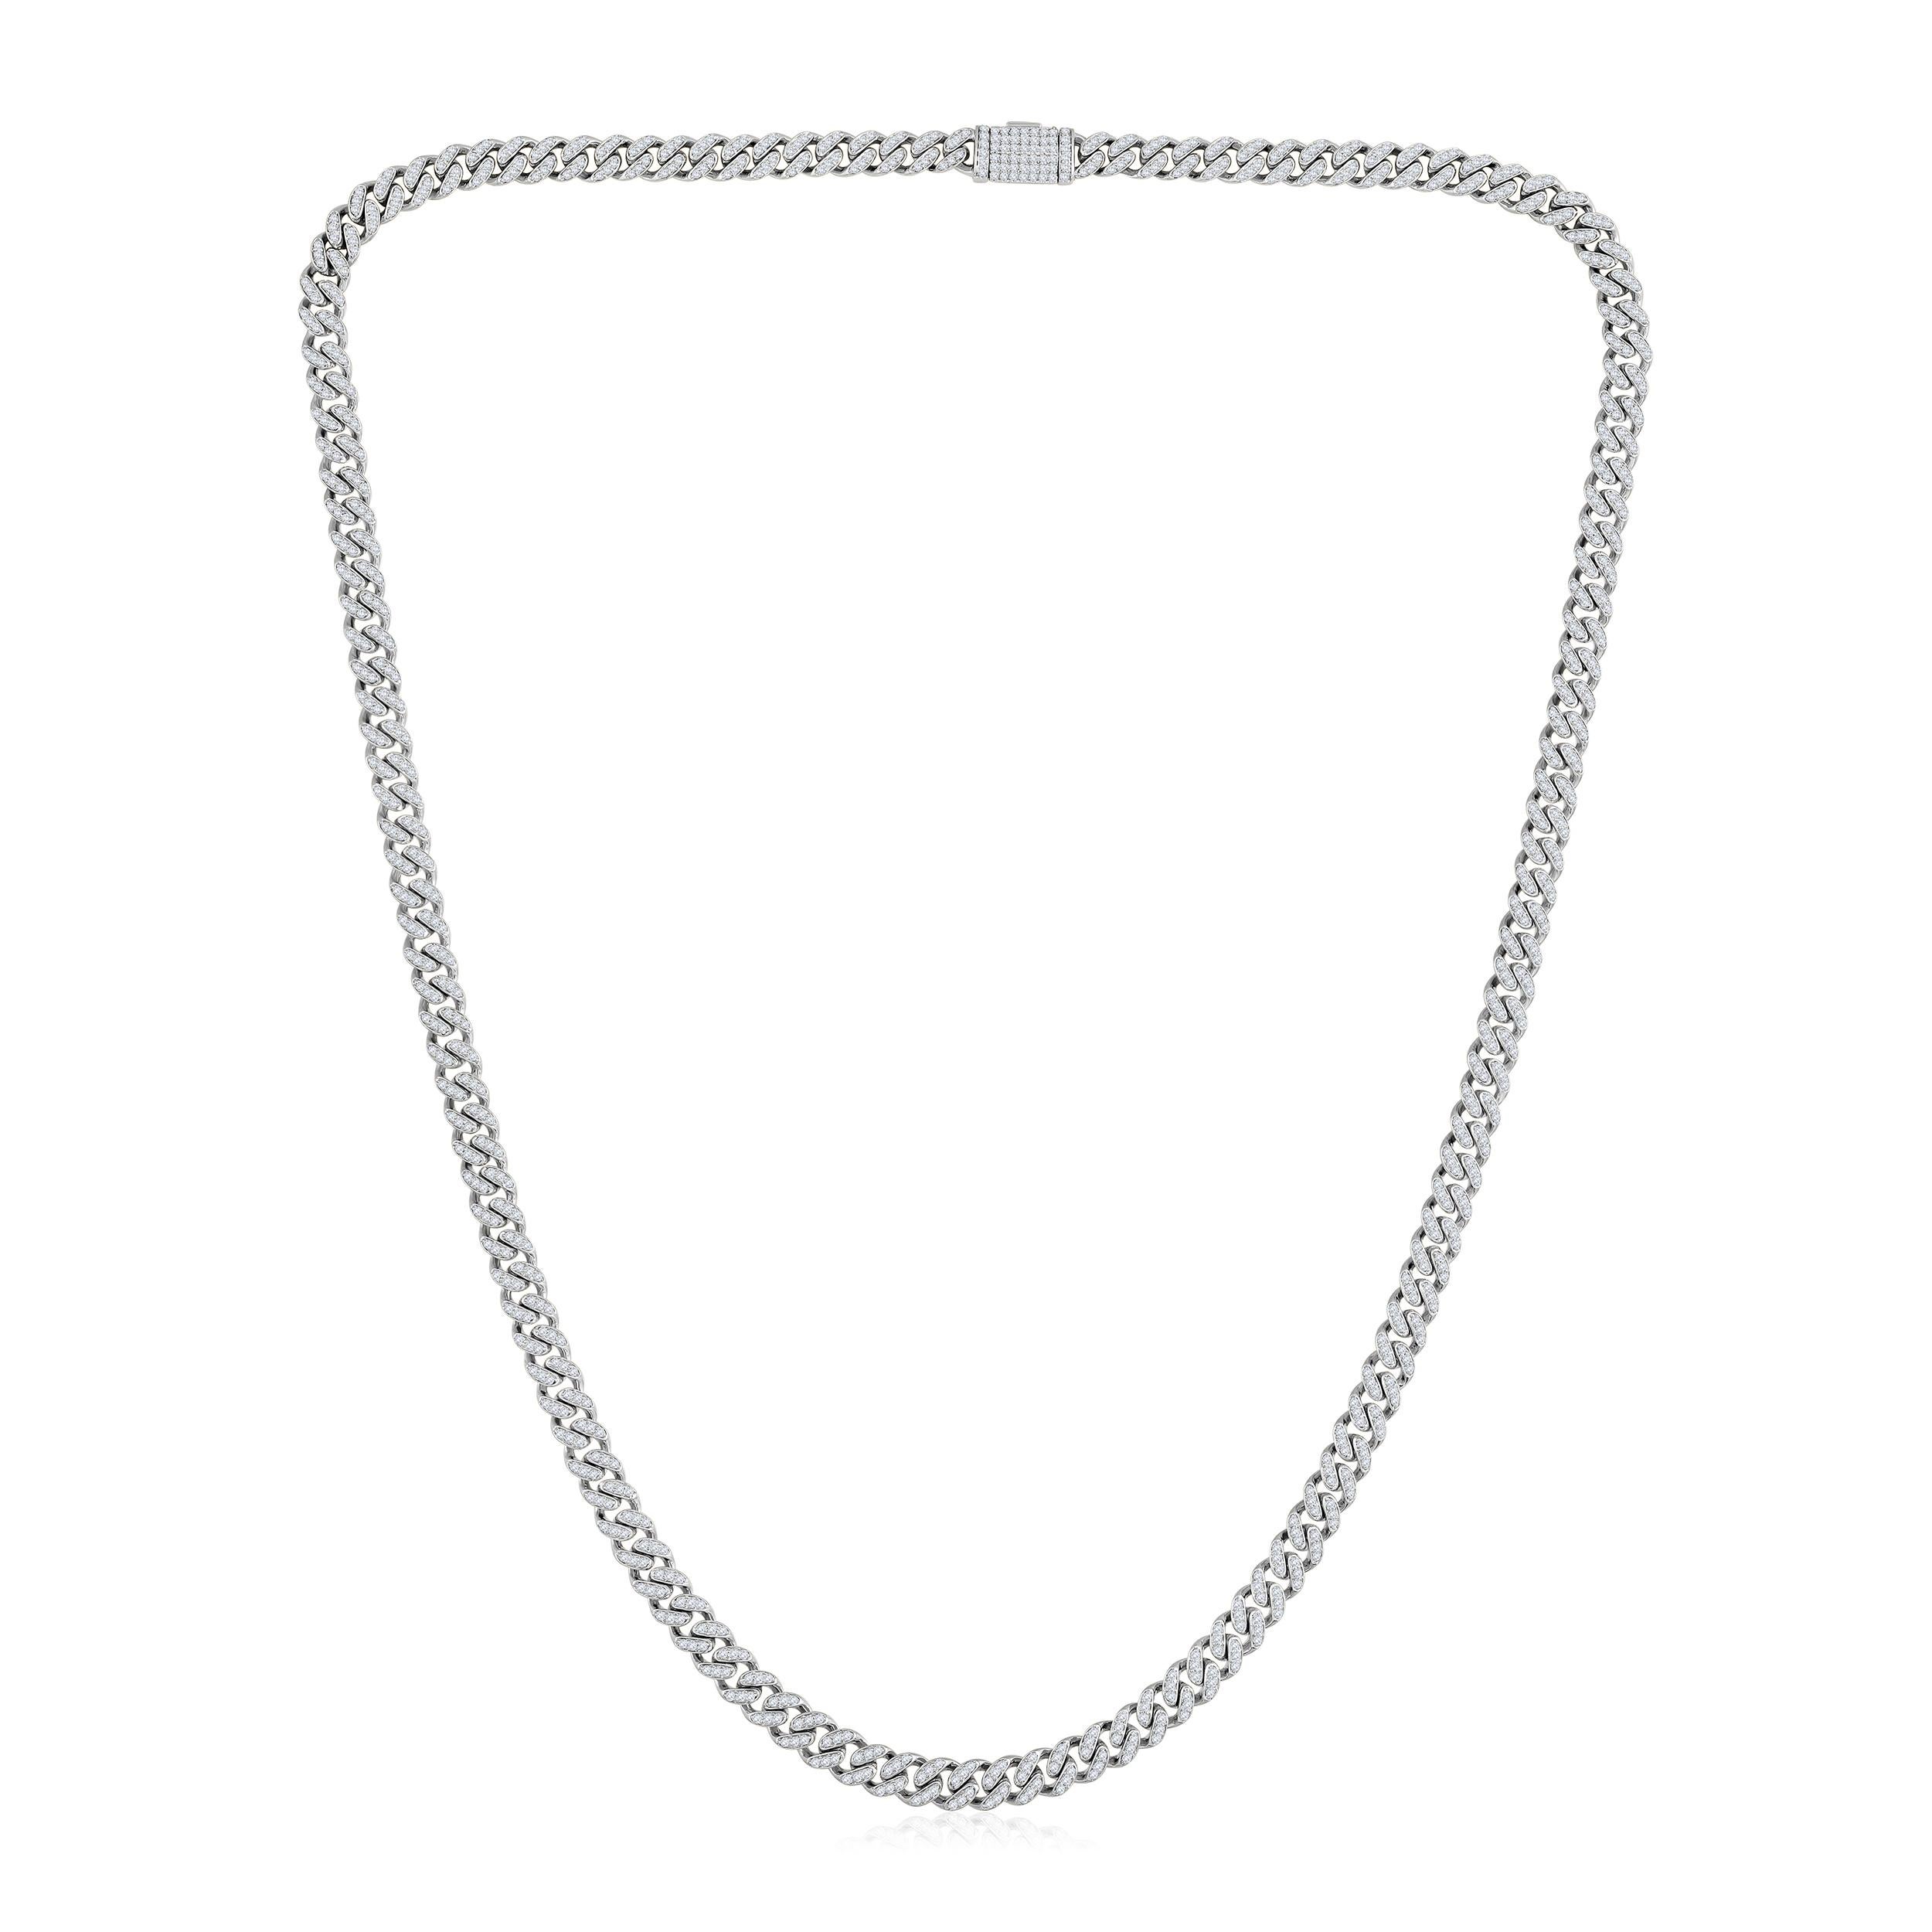 Crafted in 16.5 grams of 10K Yellow Gold, the necklace contains 732 stones of Round Diamonds with a total of 2.97 carat in F-G color and I1-I2 carat. The necklace length is 16 inches.

CONTEMPORARY AND TIMELESS ESSENCE: Crafted in 14-karat/18-karat